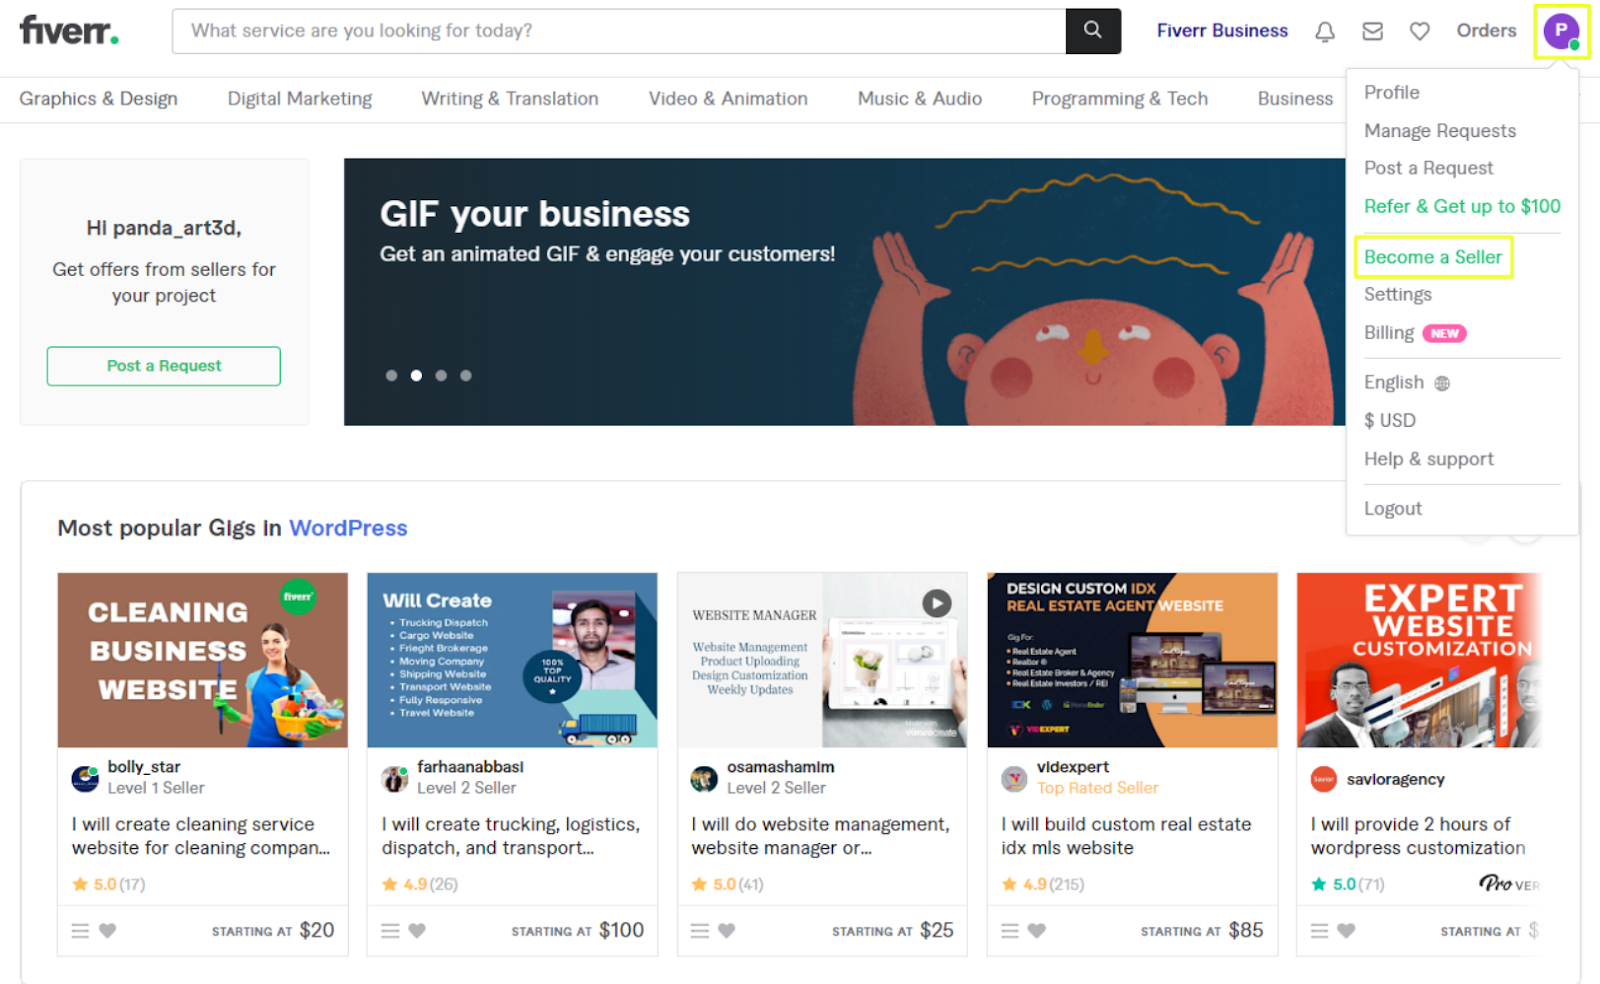 Fiverr landing page - 'Become a seller' option in top right corner